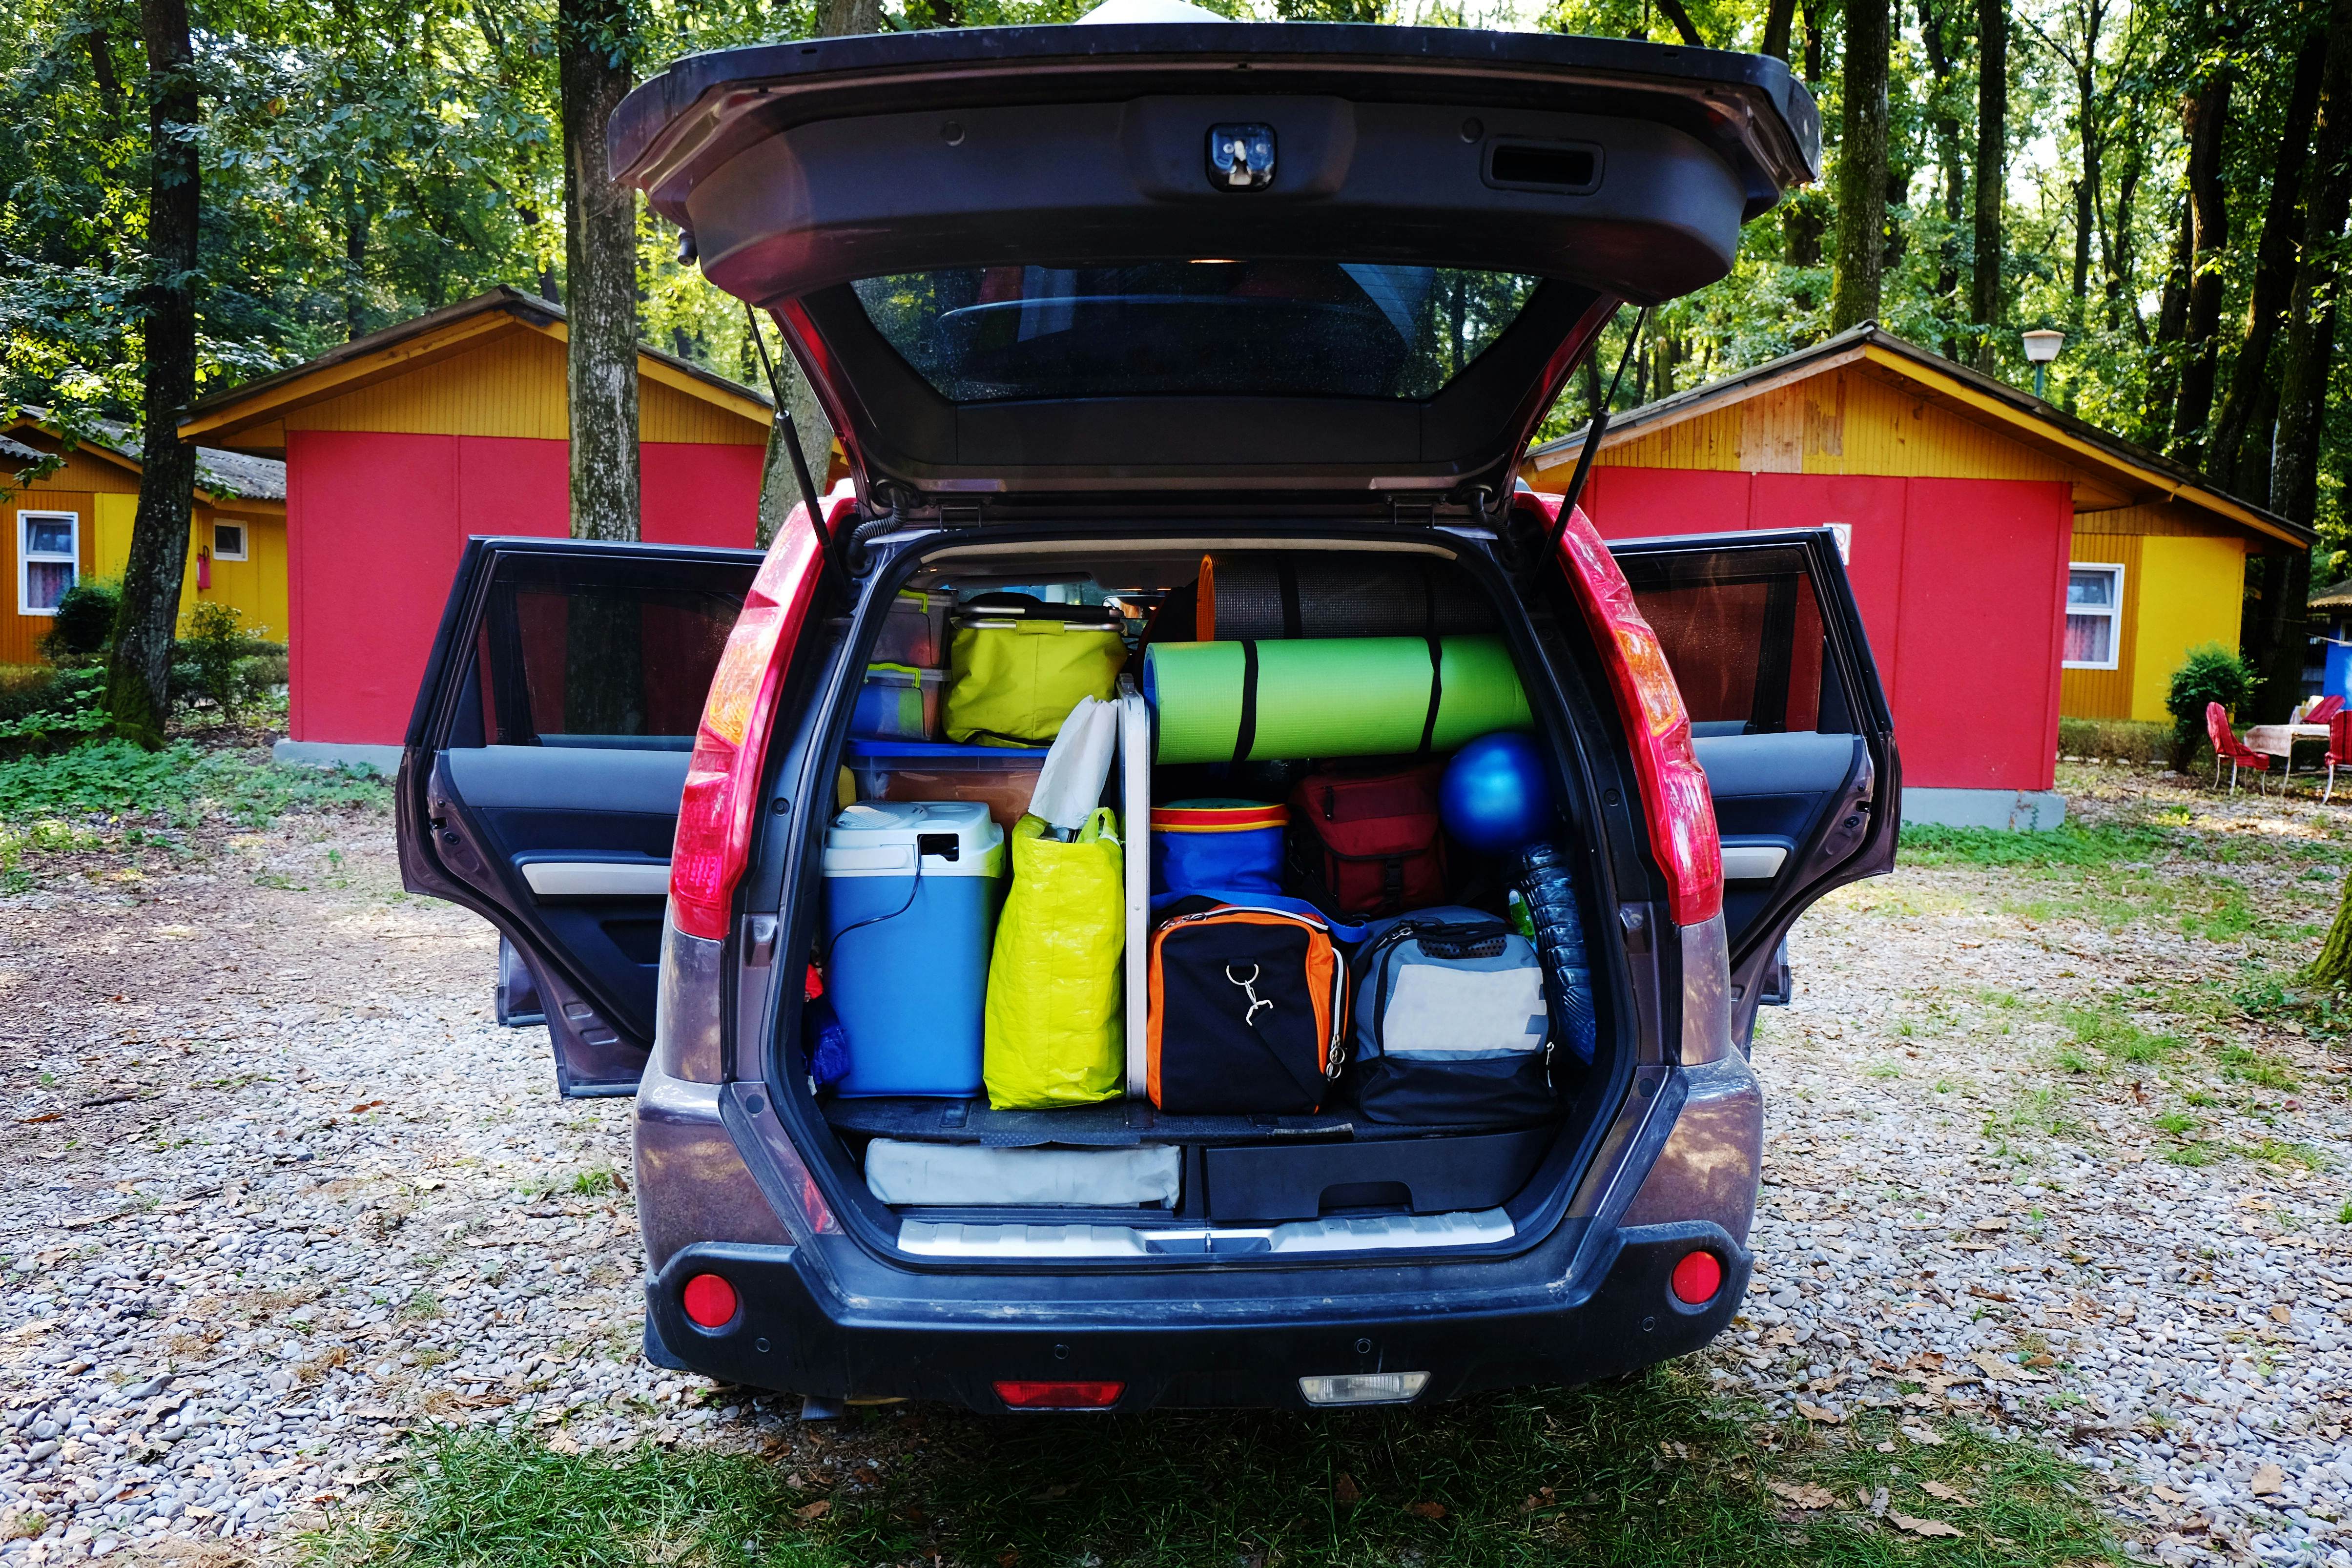 The 9 best car camping essentials - Lonely Planet